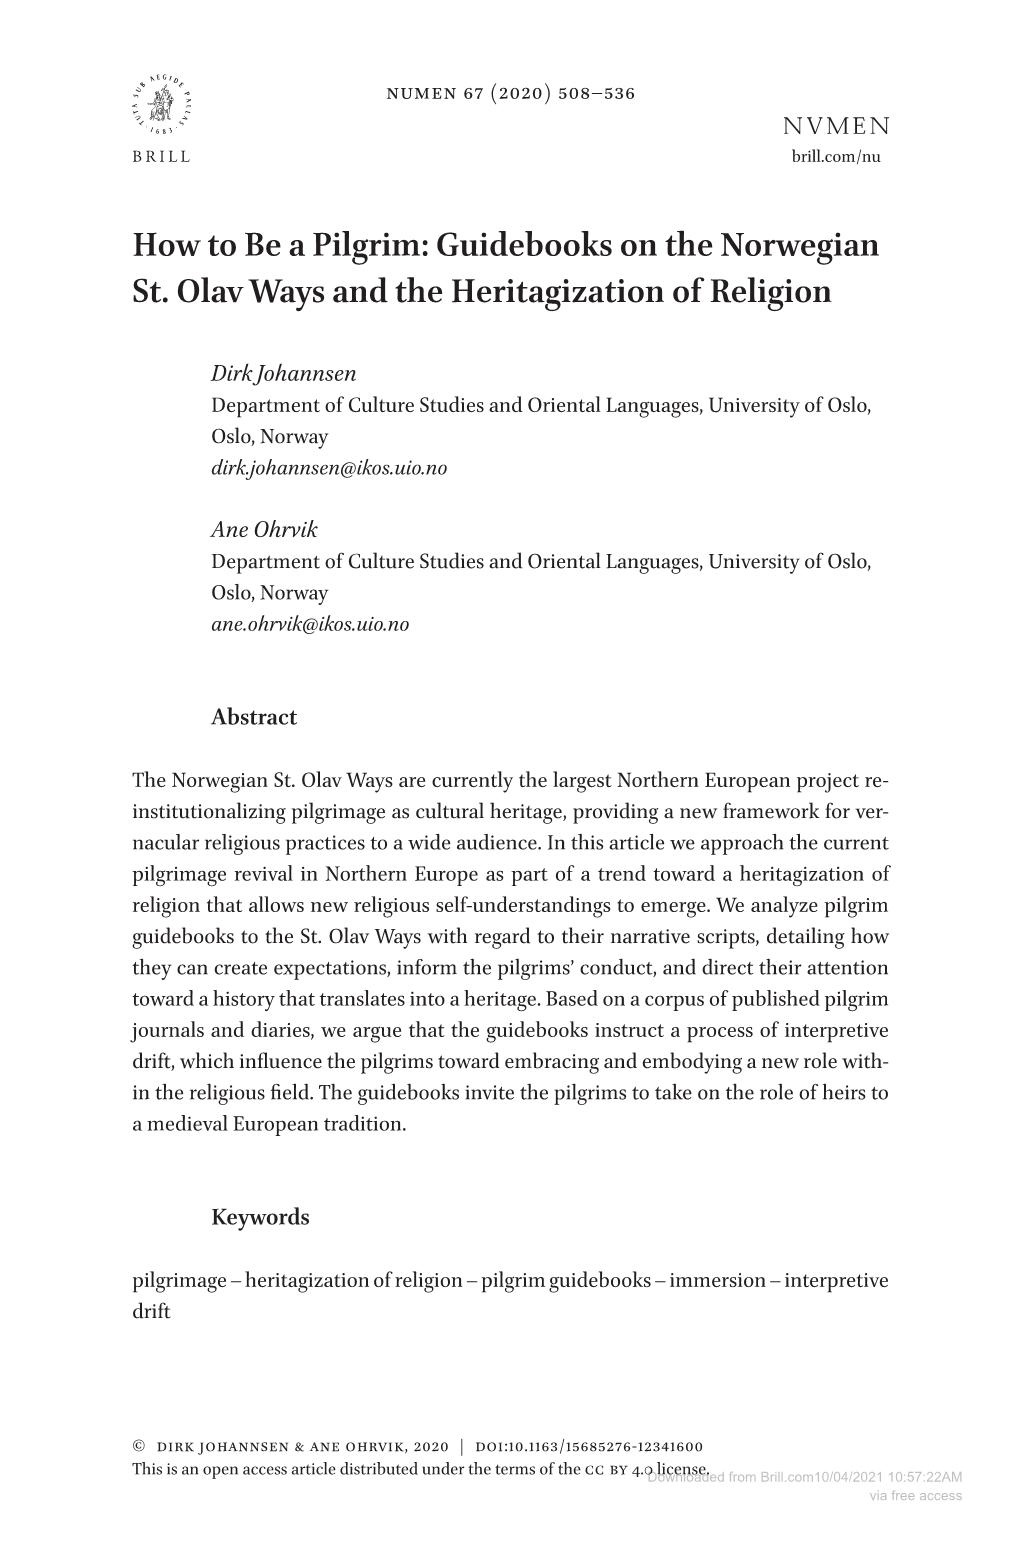 Guidebooks on the Norwegian St. Olav Ways and the Heritagization of Religion